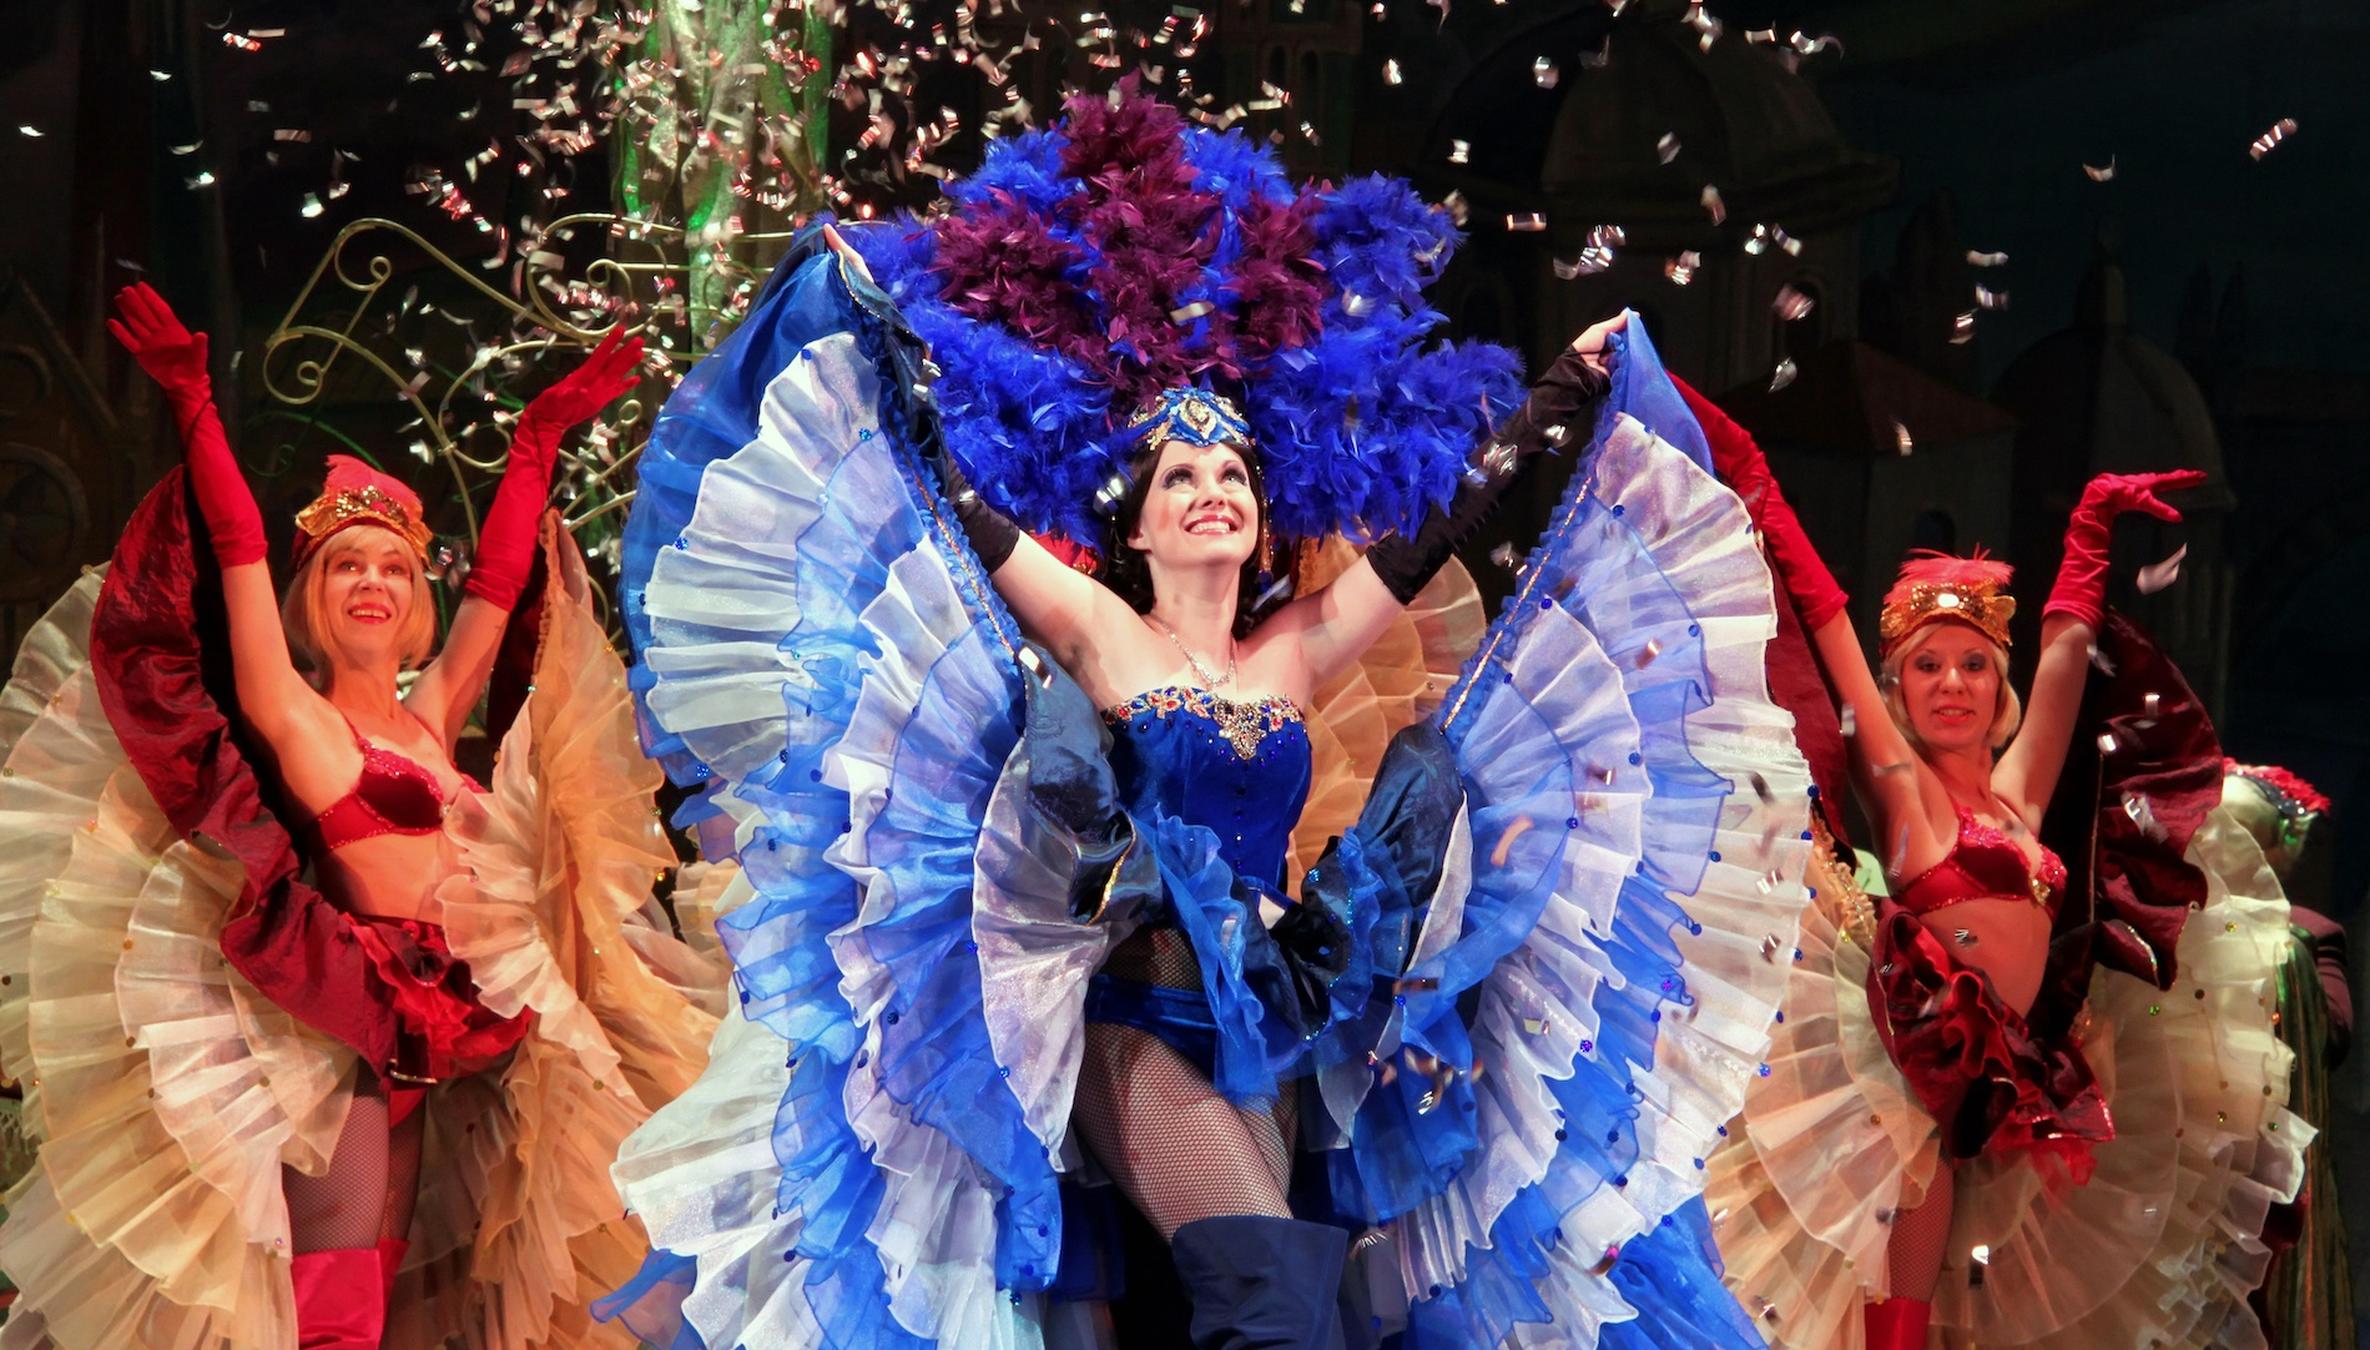 How to Build a Burlesque Costume: ON A BUDGET